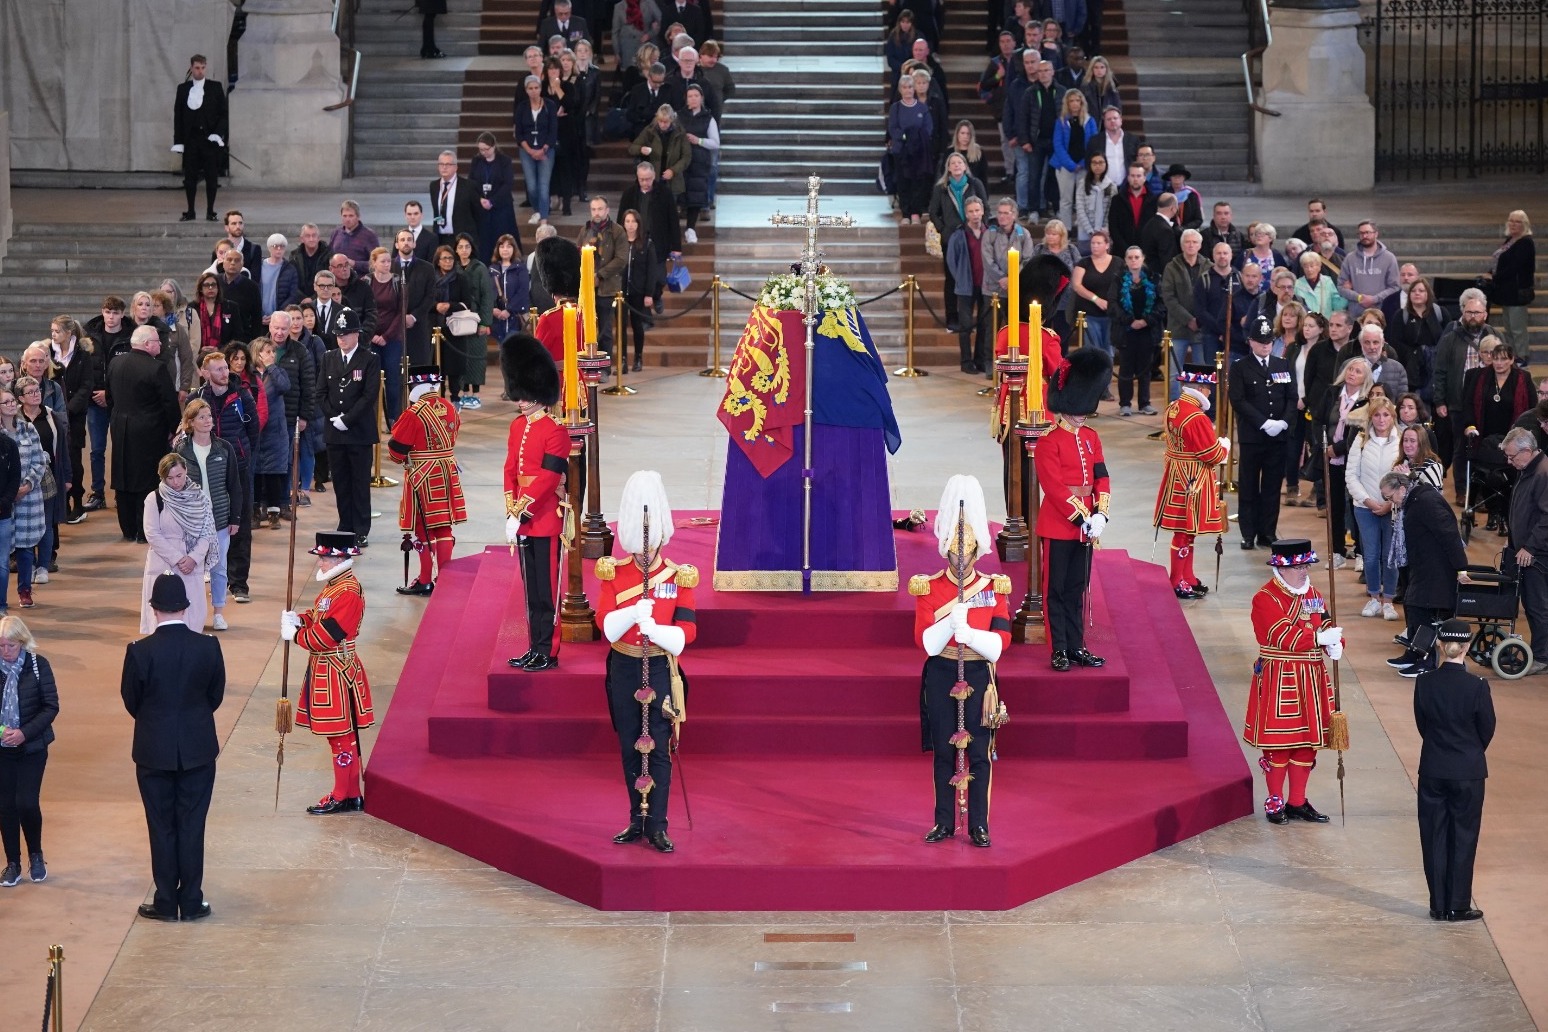 Victoria Cross and George Cross recipients ‘humbled’ to be part of funeral 